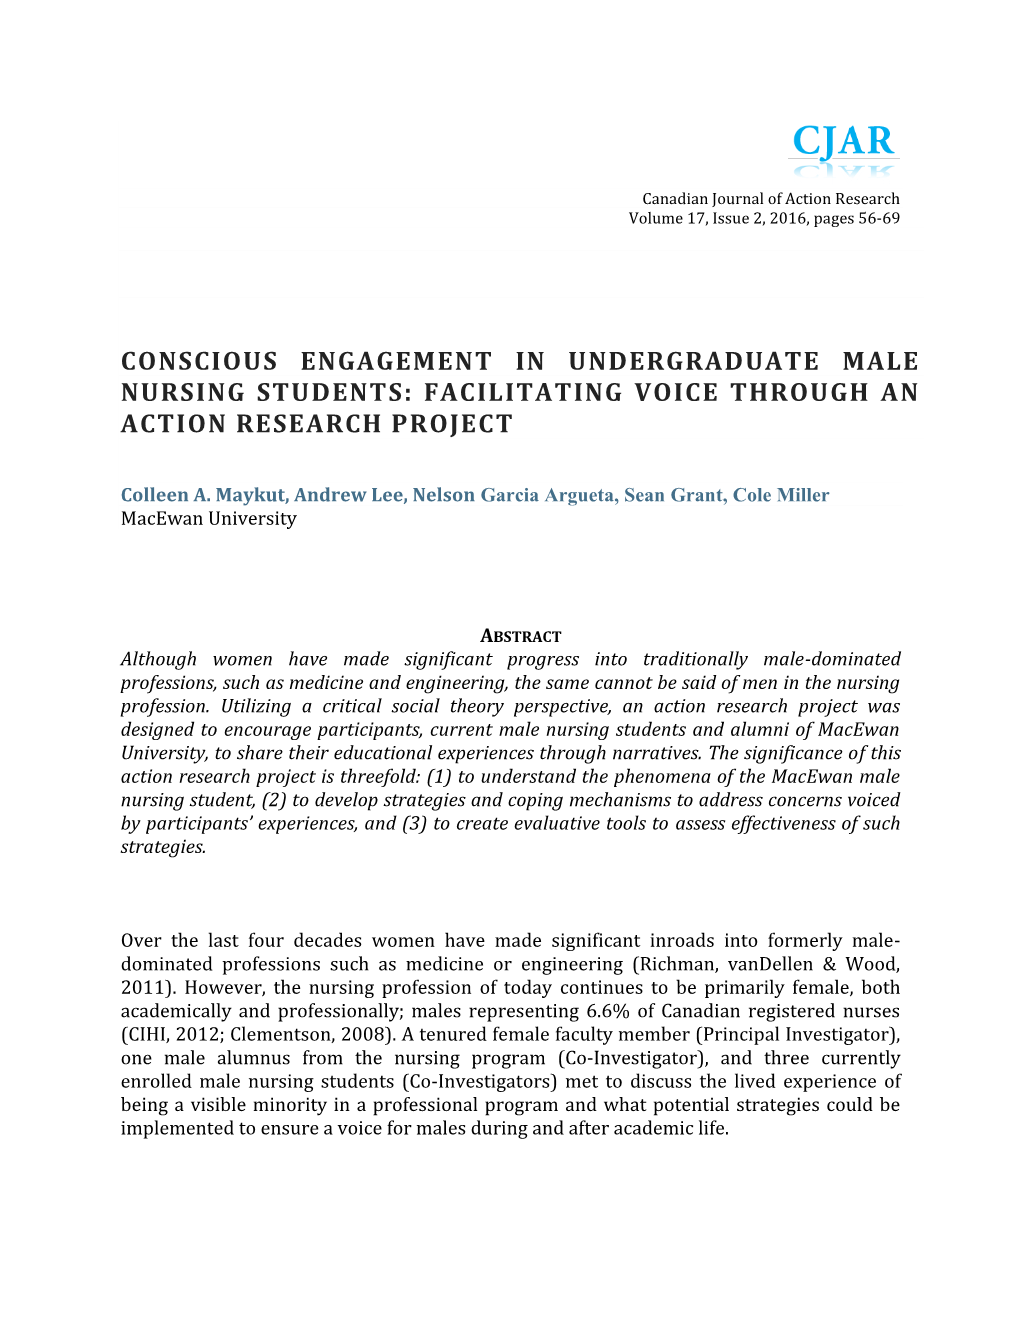 Conscious Engagement in Undergraduate Male Nursing Students: Facilitating Voice Through an Action Research Project